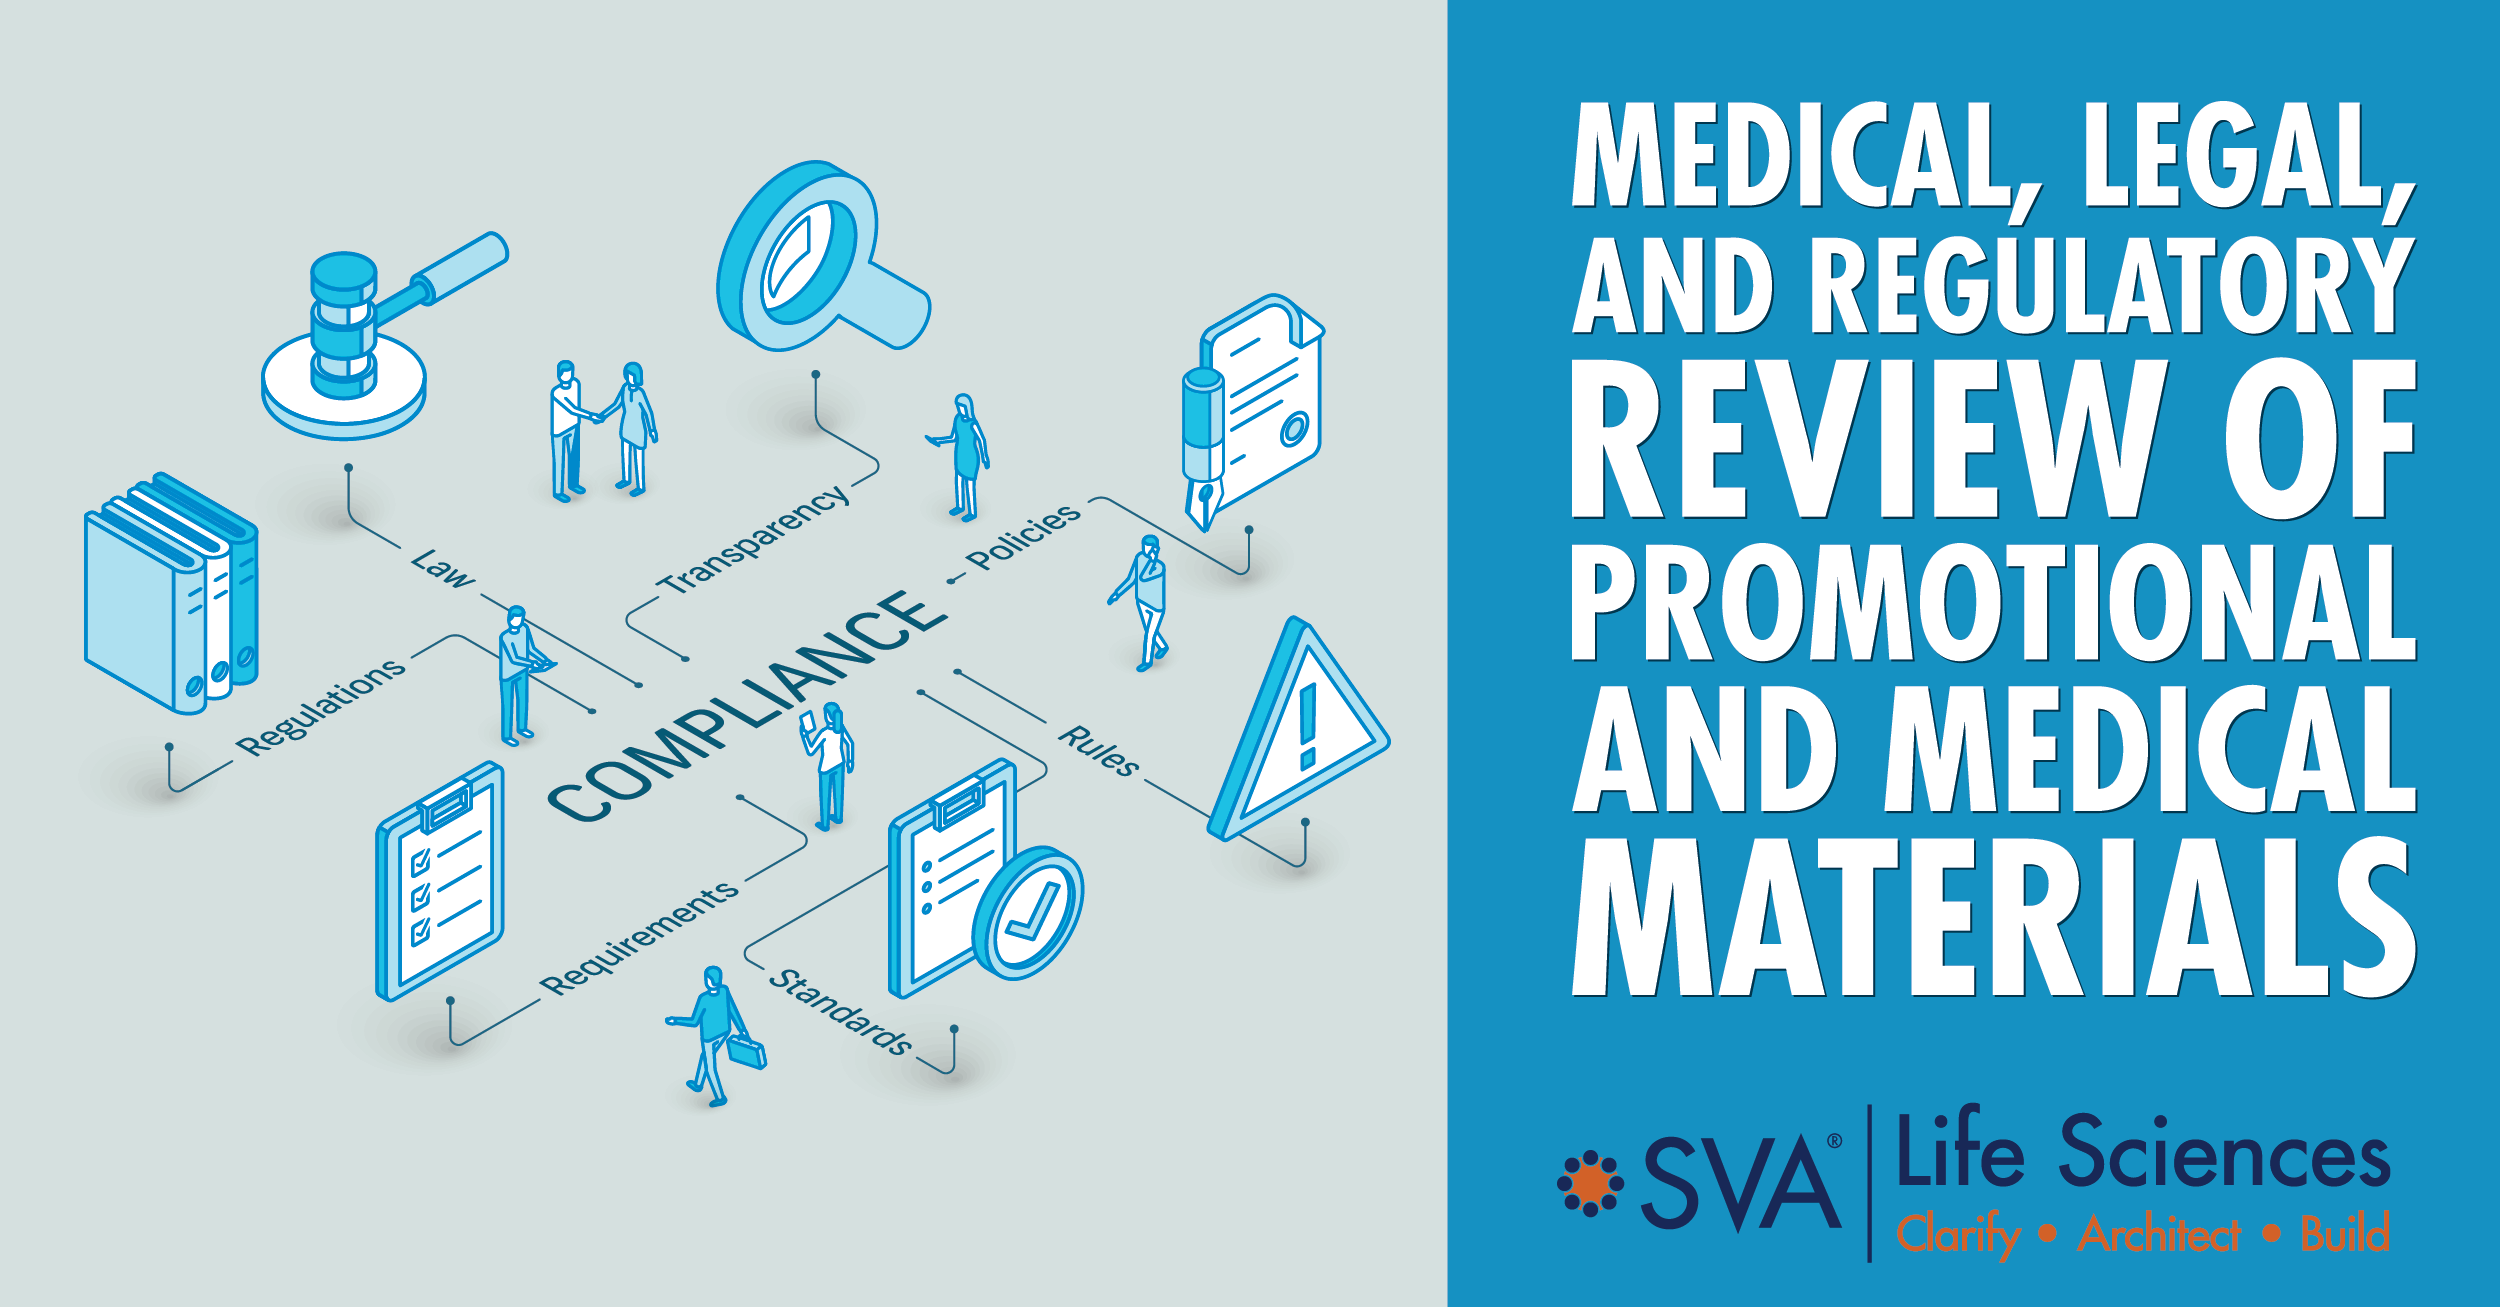 Medical, Legal, and Regulatory Review of Promotional and Medical Materials